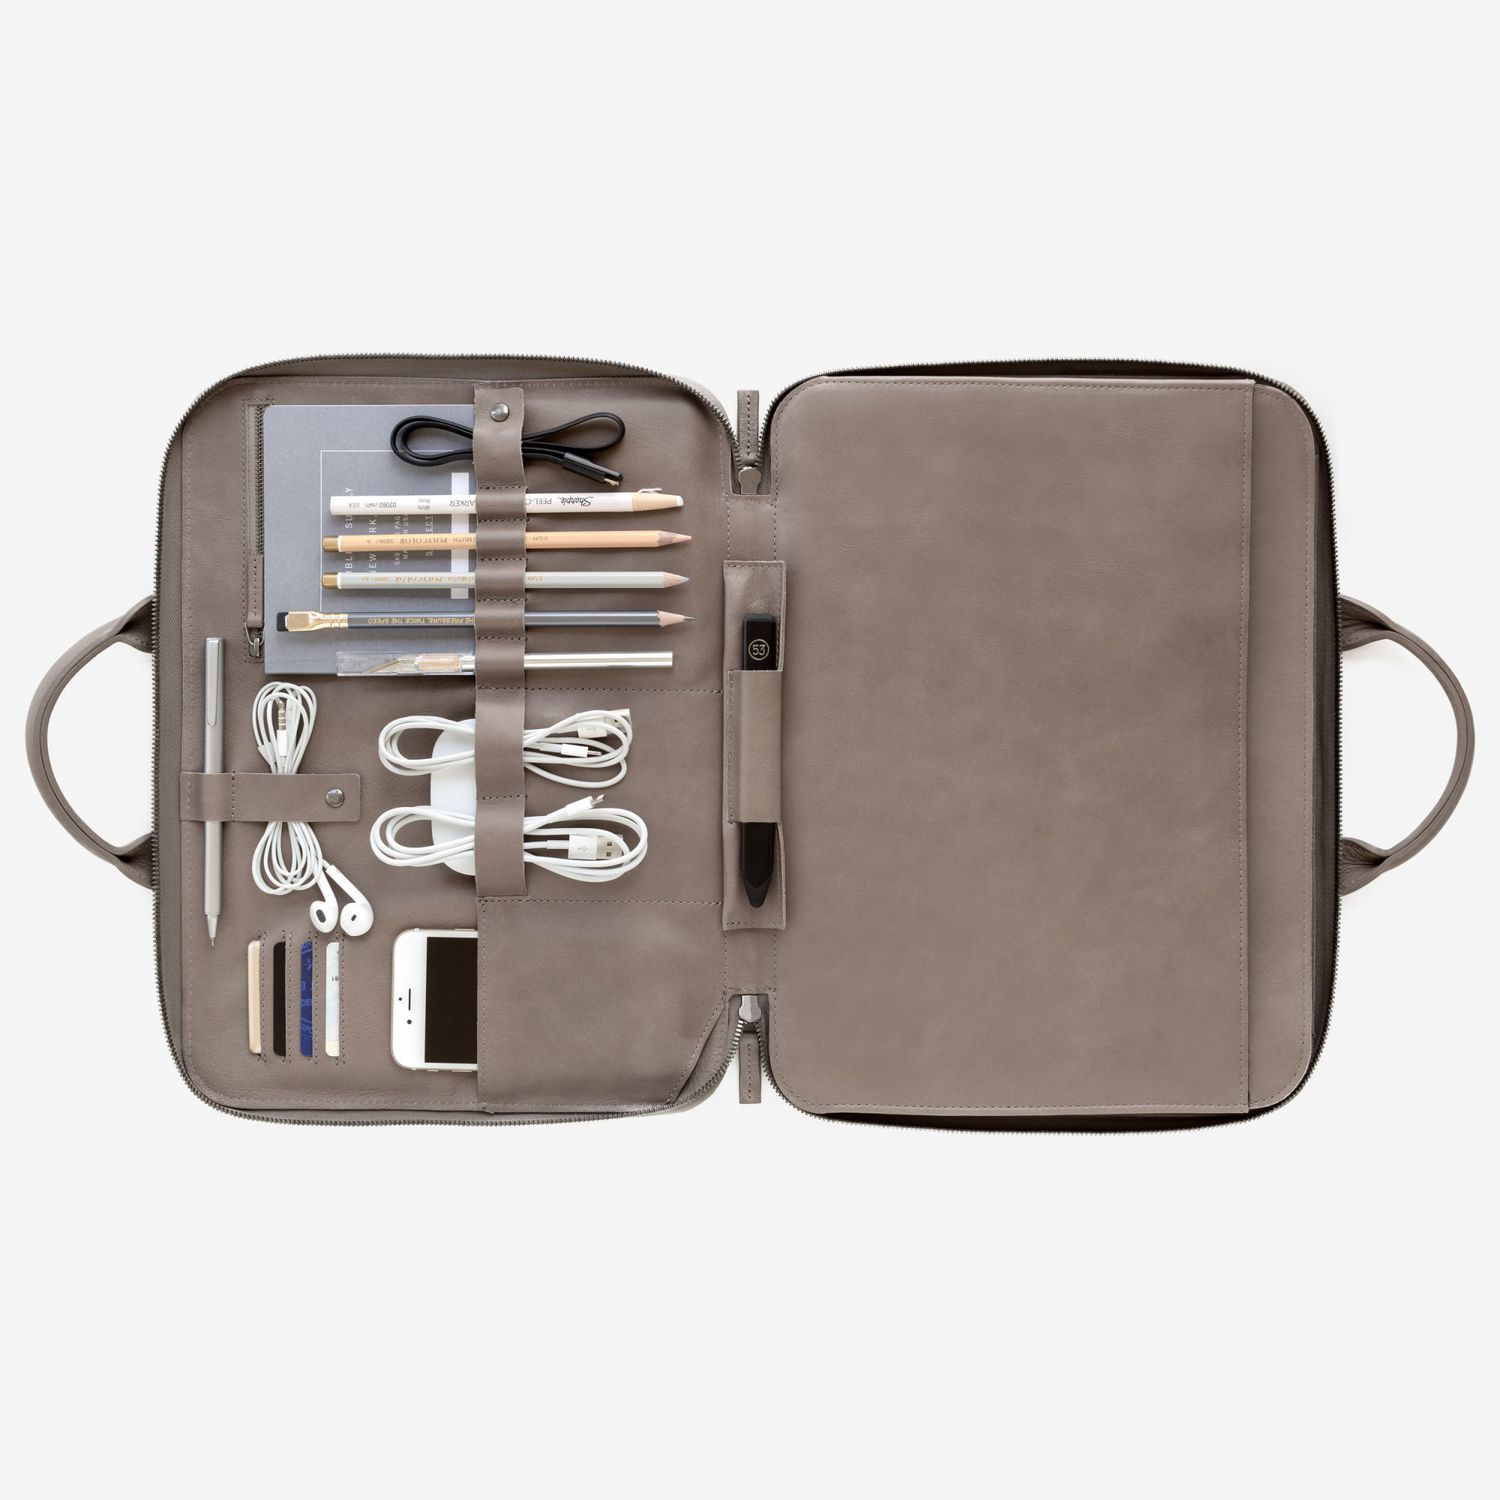 THIS IS GROUND LAPTOP CASE